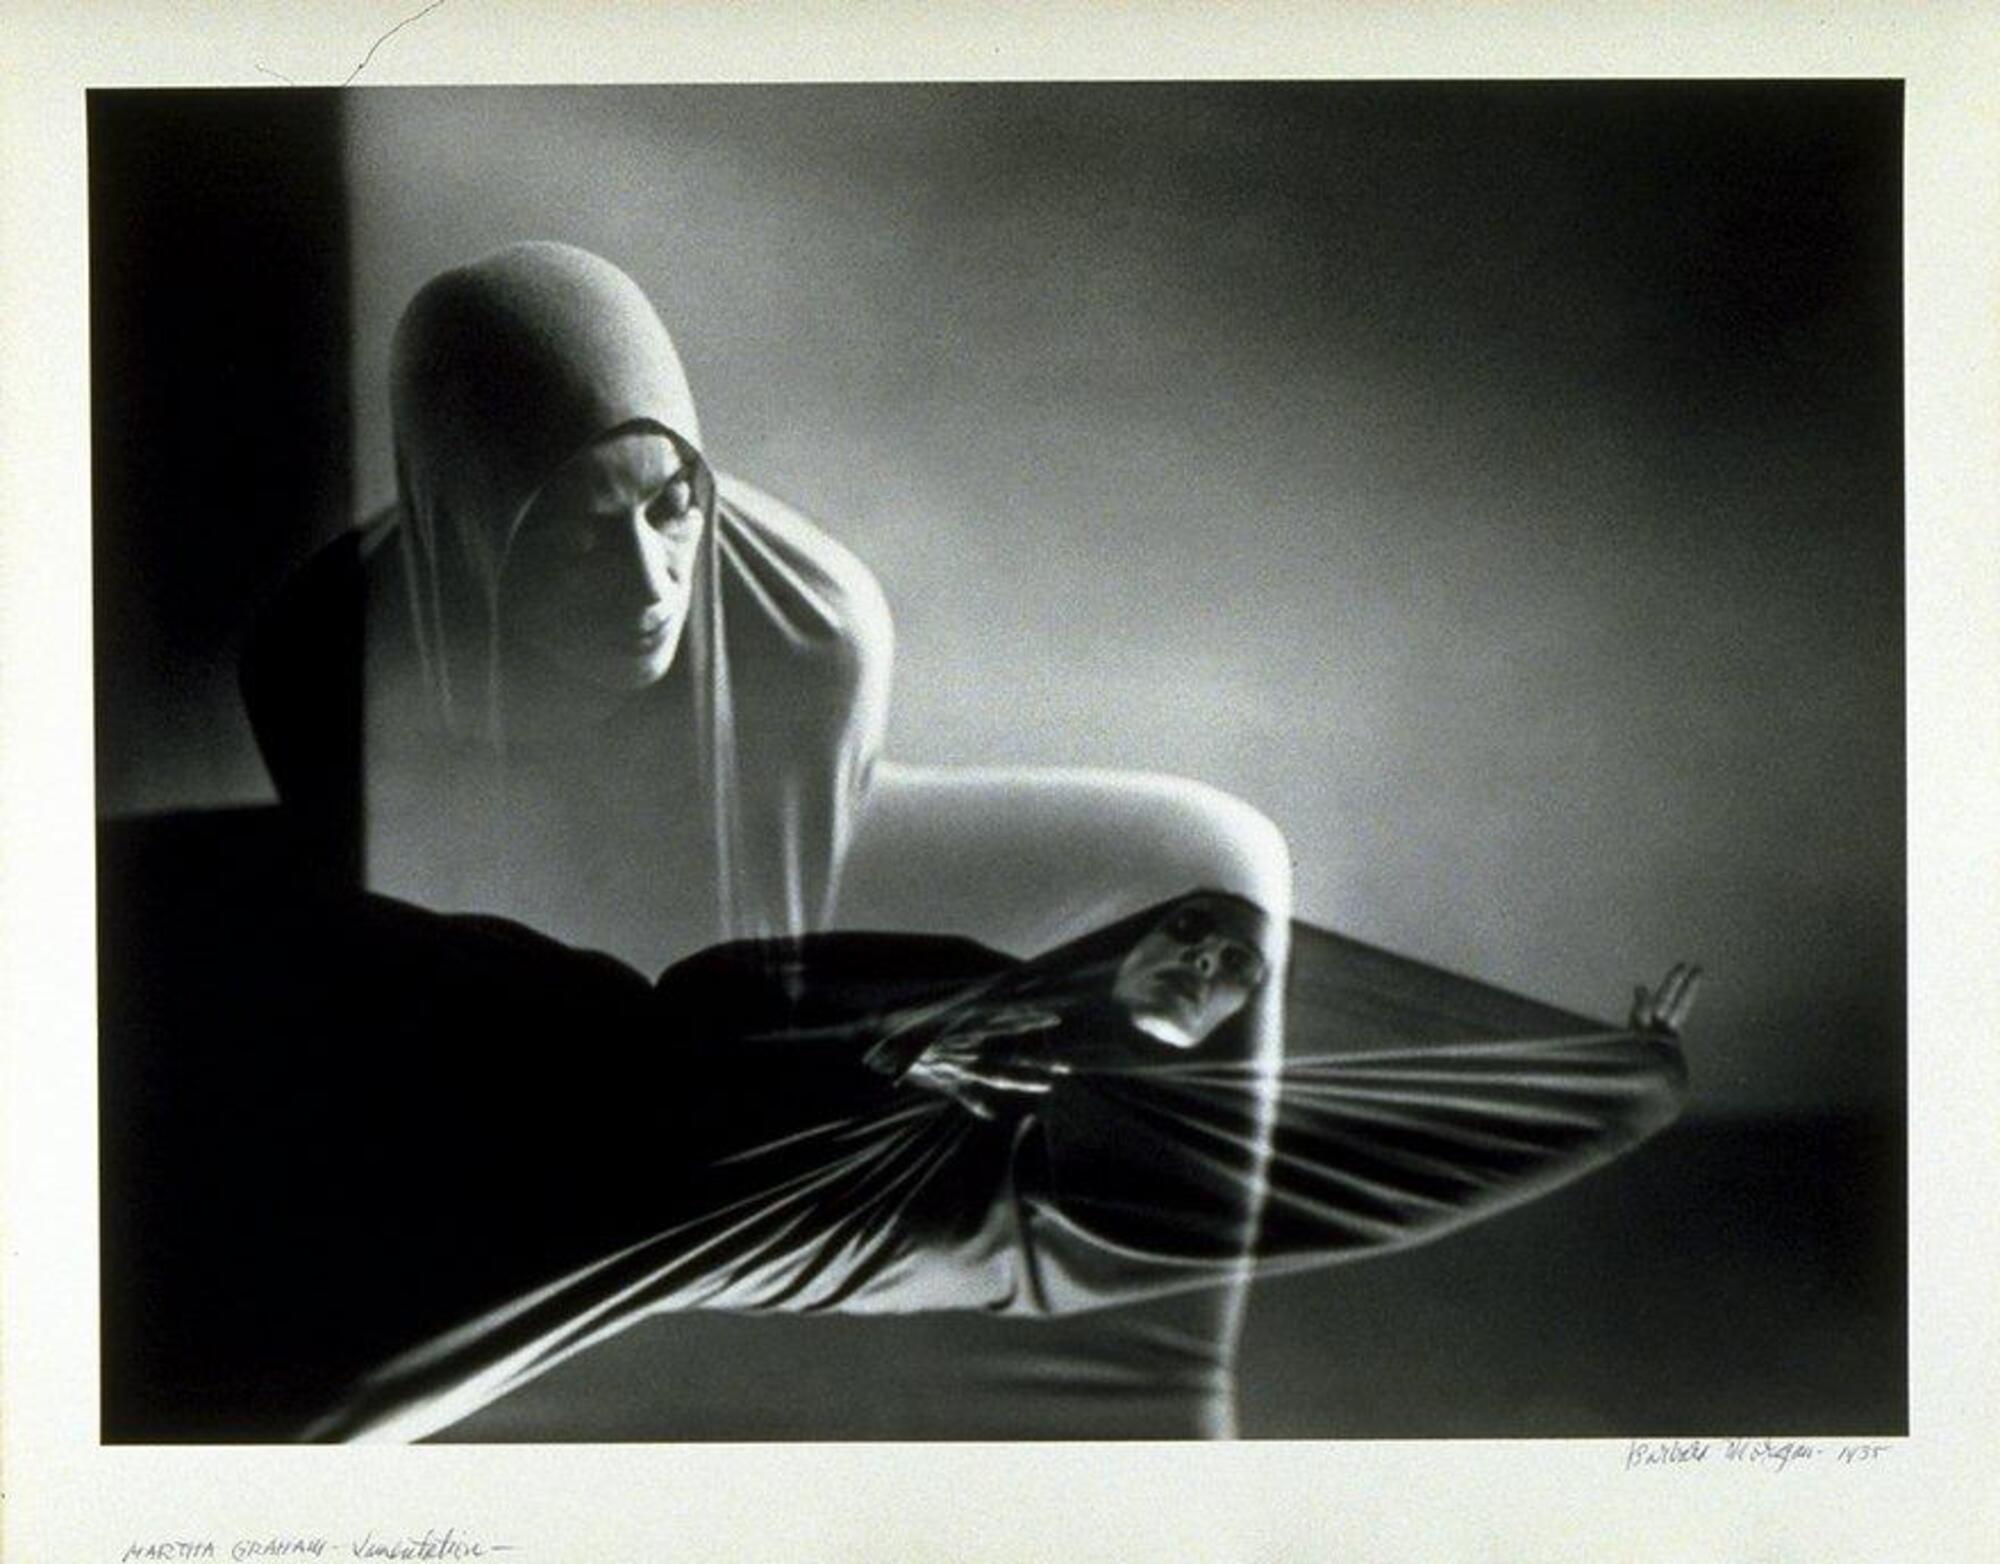 A composite print from two negatives, each representing a moment from a dance performance. The woman wears a large cloth, which she manipulates with her motions to create forms and shapes.